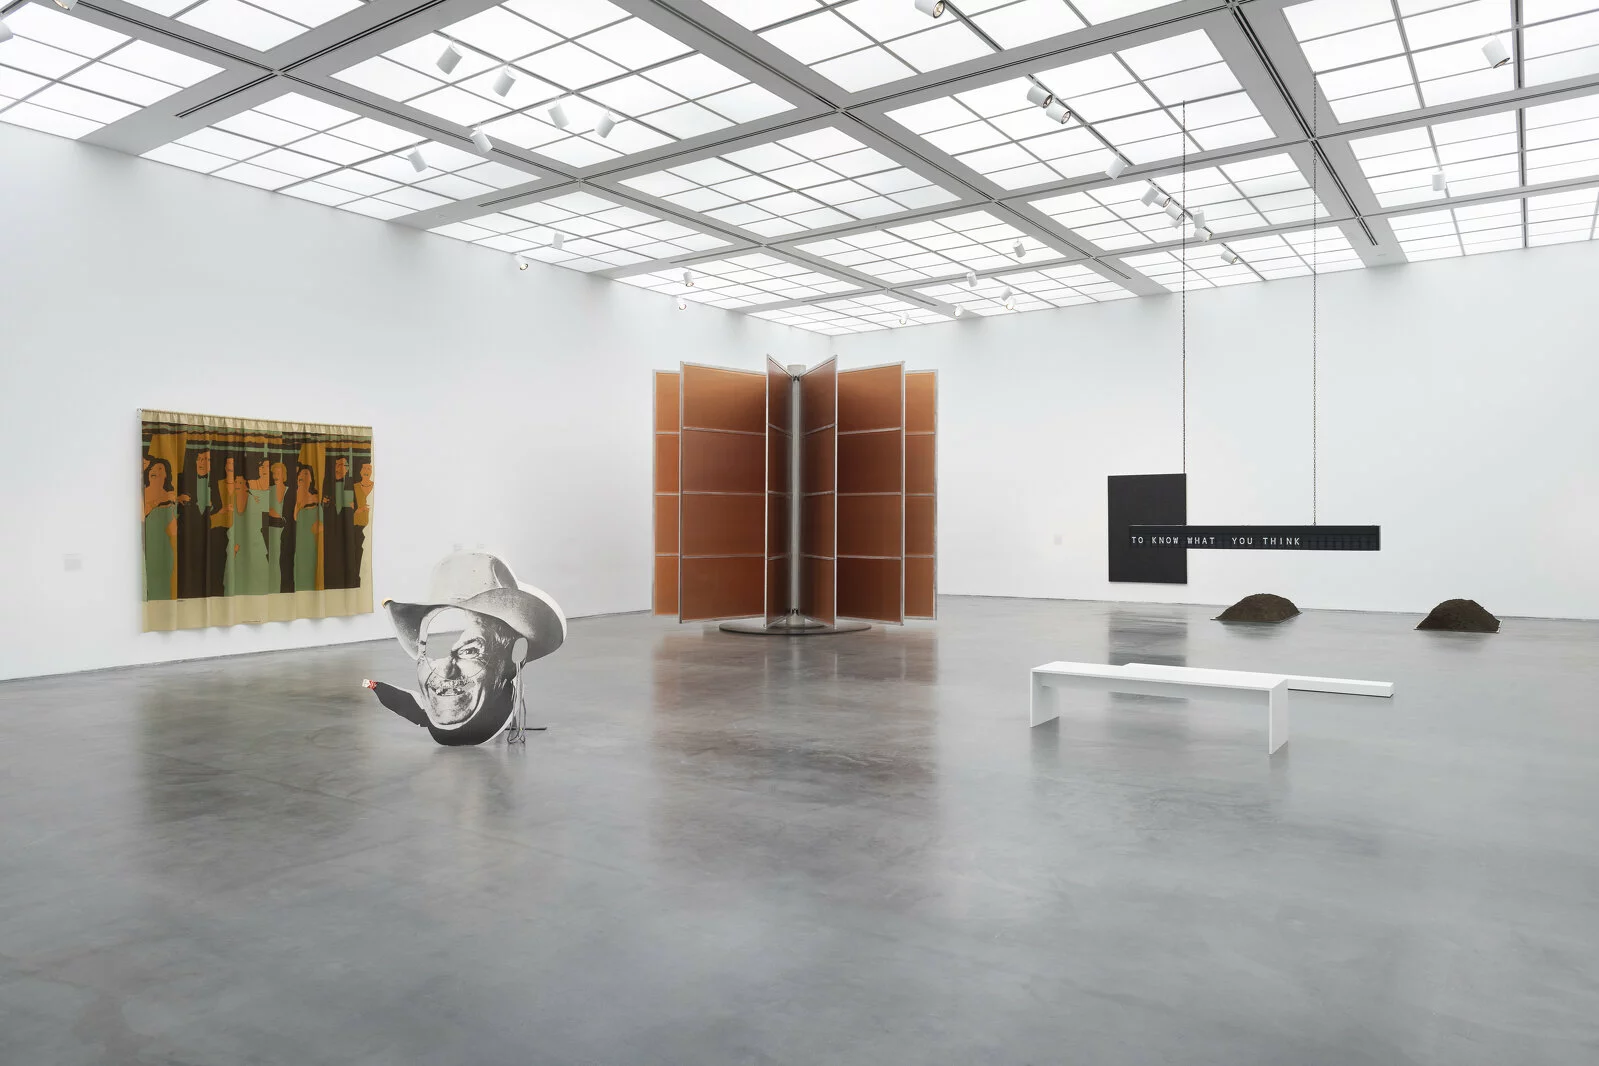 Large, white gallery space with six artworks visible. Two are hung on walls; four are installations.